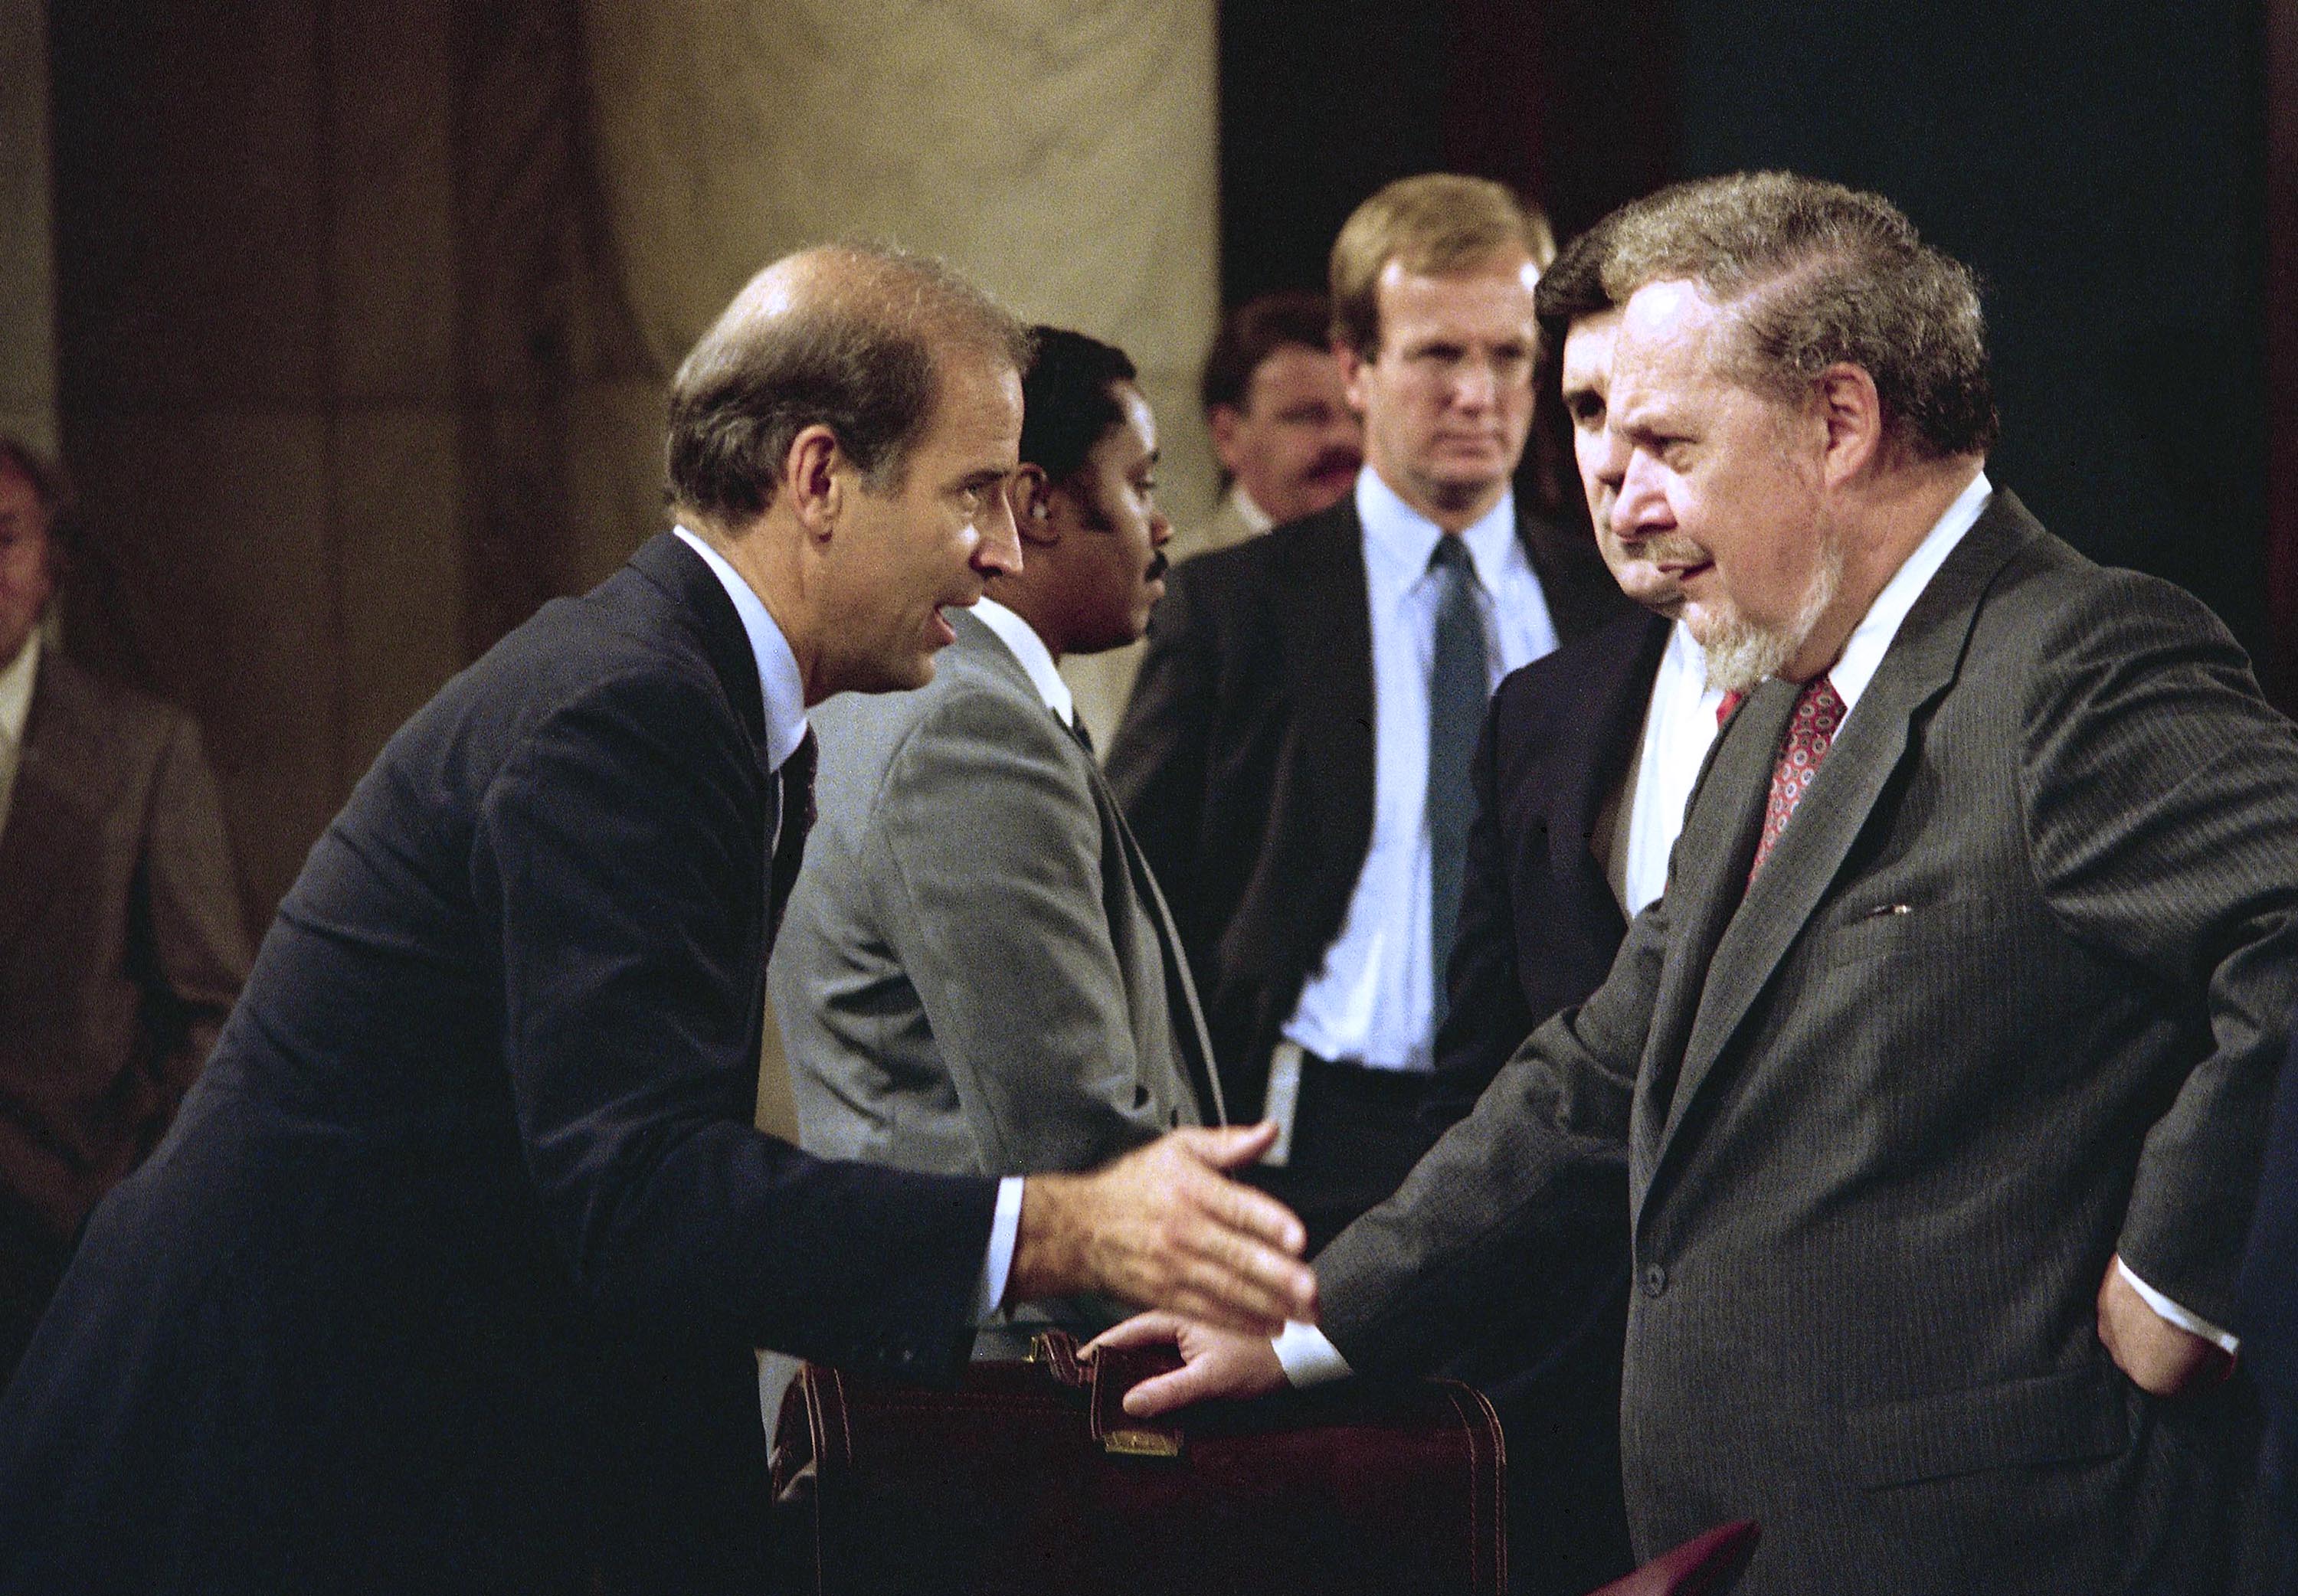 Then-Sen. Joseph Biden, chairman of the Senate Judiciary Committee, left, greets Judge Robert Bork prior to a hearing of the committee on Capitol Hill in September 1987. The committee was holding hearings on the nomination of Bork to become a Supreme Court Justice. 